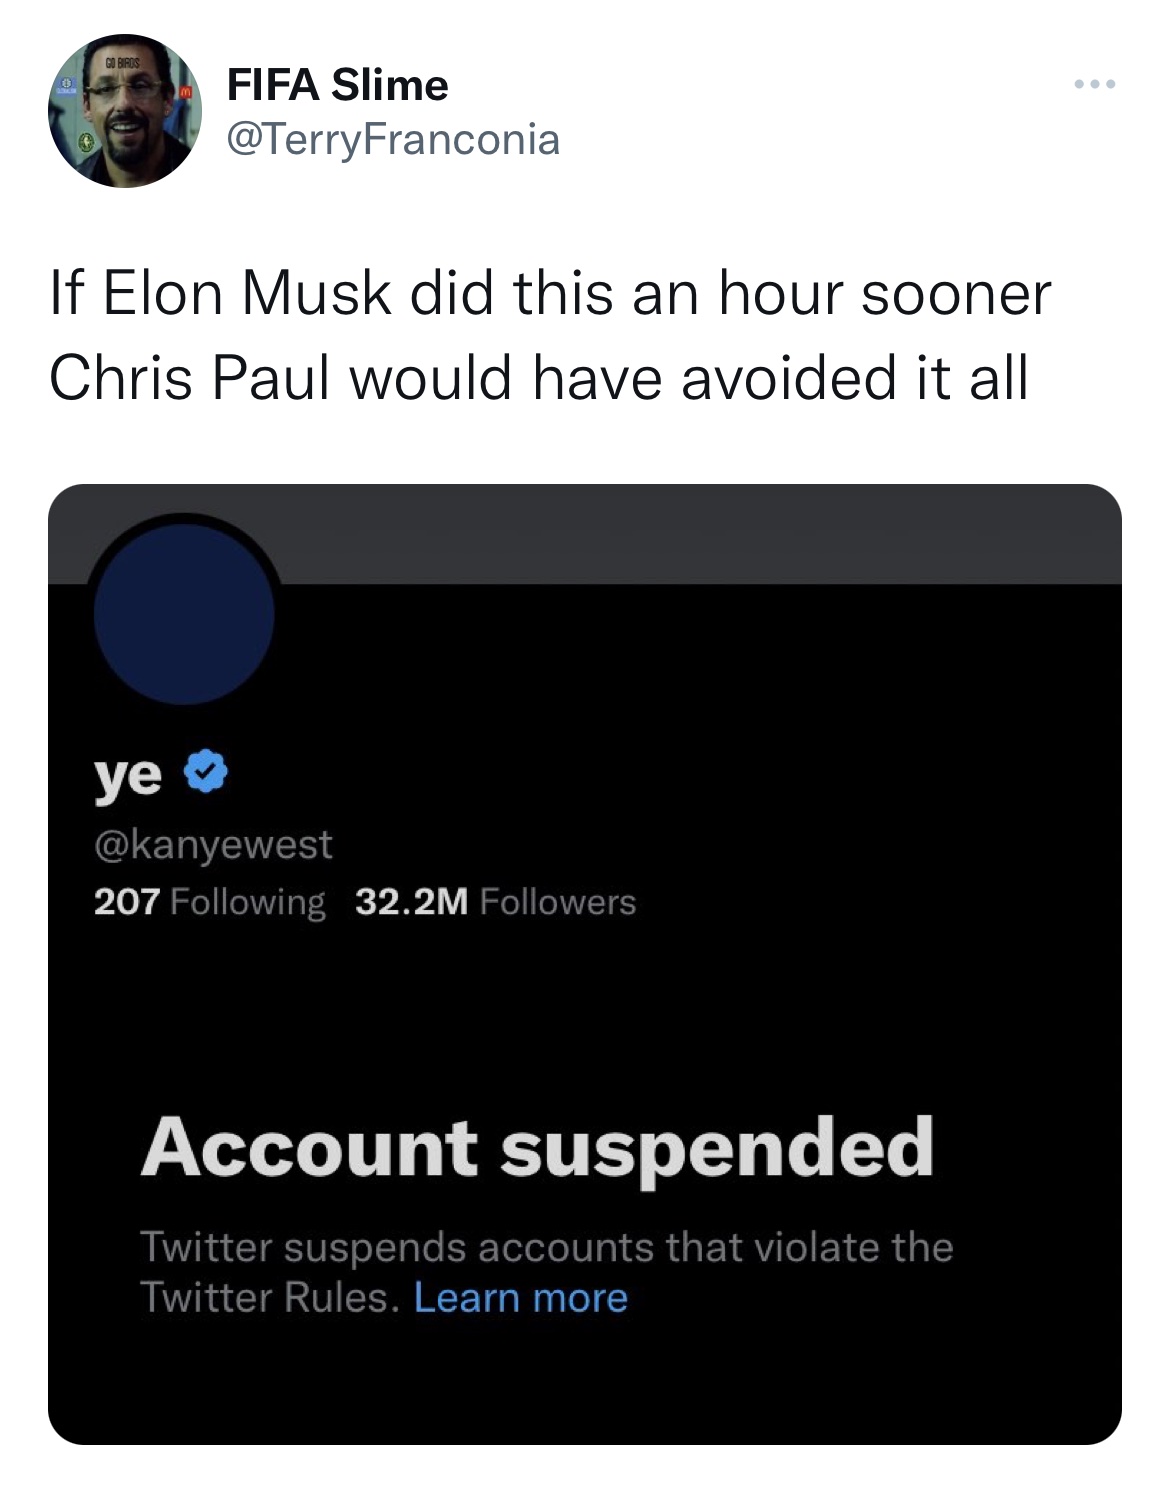 Chris Paul and Kim K memes - multimedia - 0 Go Birds Fifa Slime If Elon Musk did this an hour sooner Chris Paul would have avoided it all ye 207 ing 32.2M ers Account suspended Twitter suspends accounts that violate the Twitter Rules. Learn more